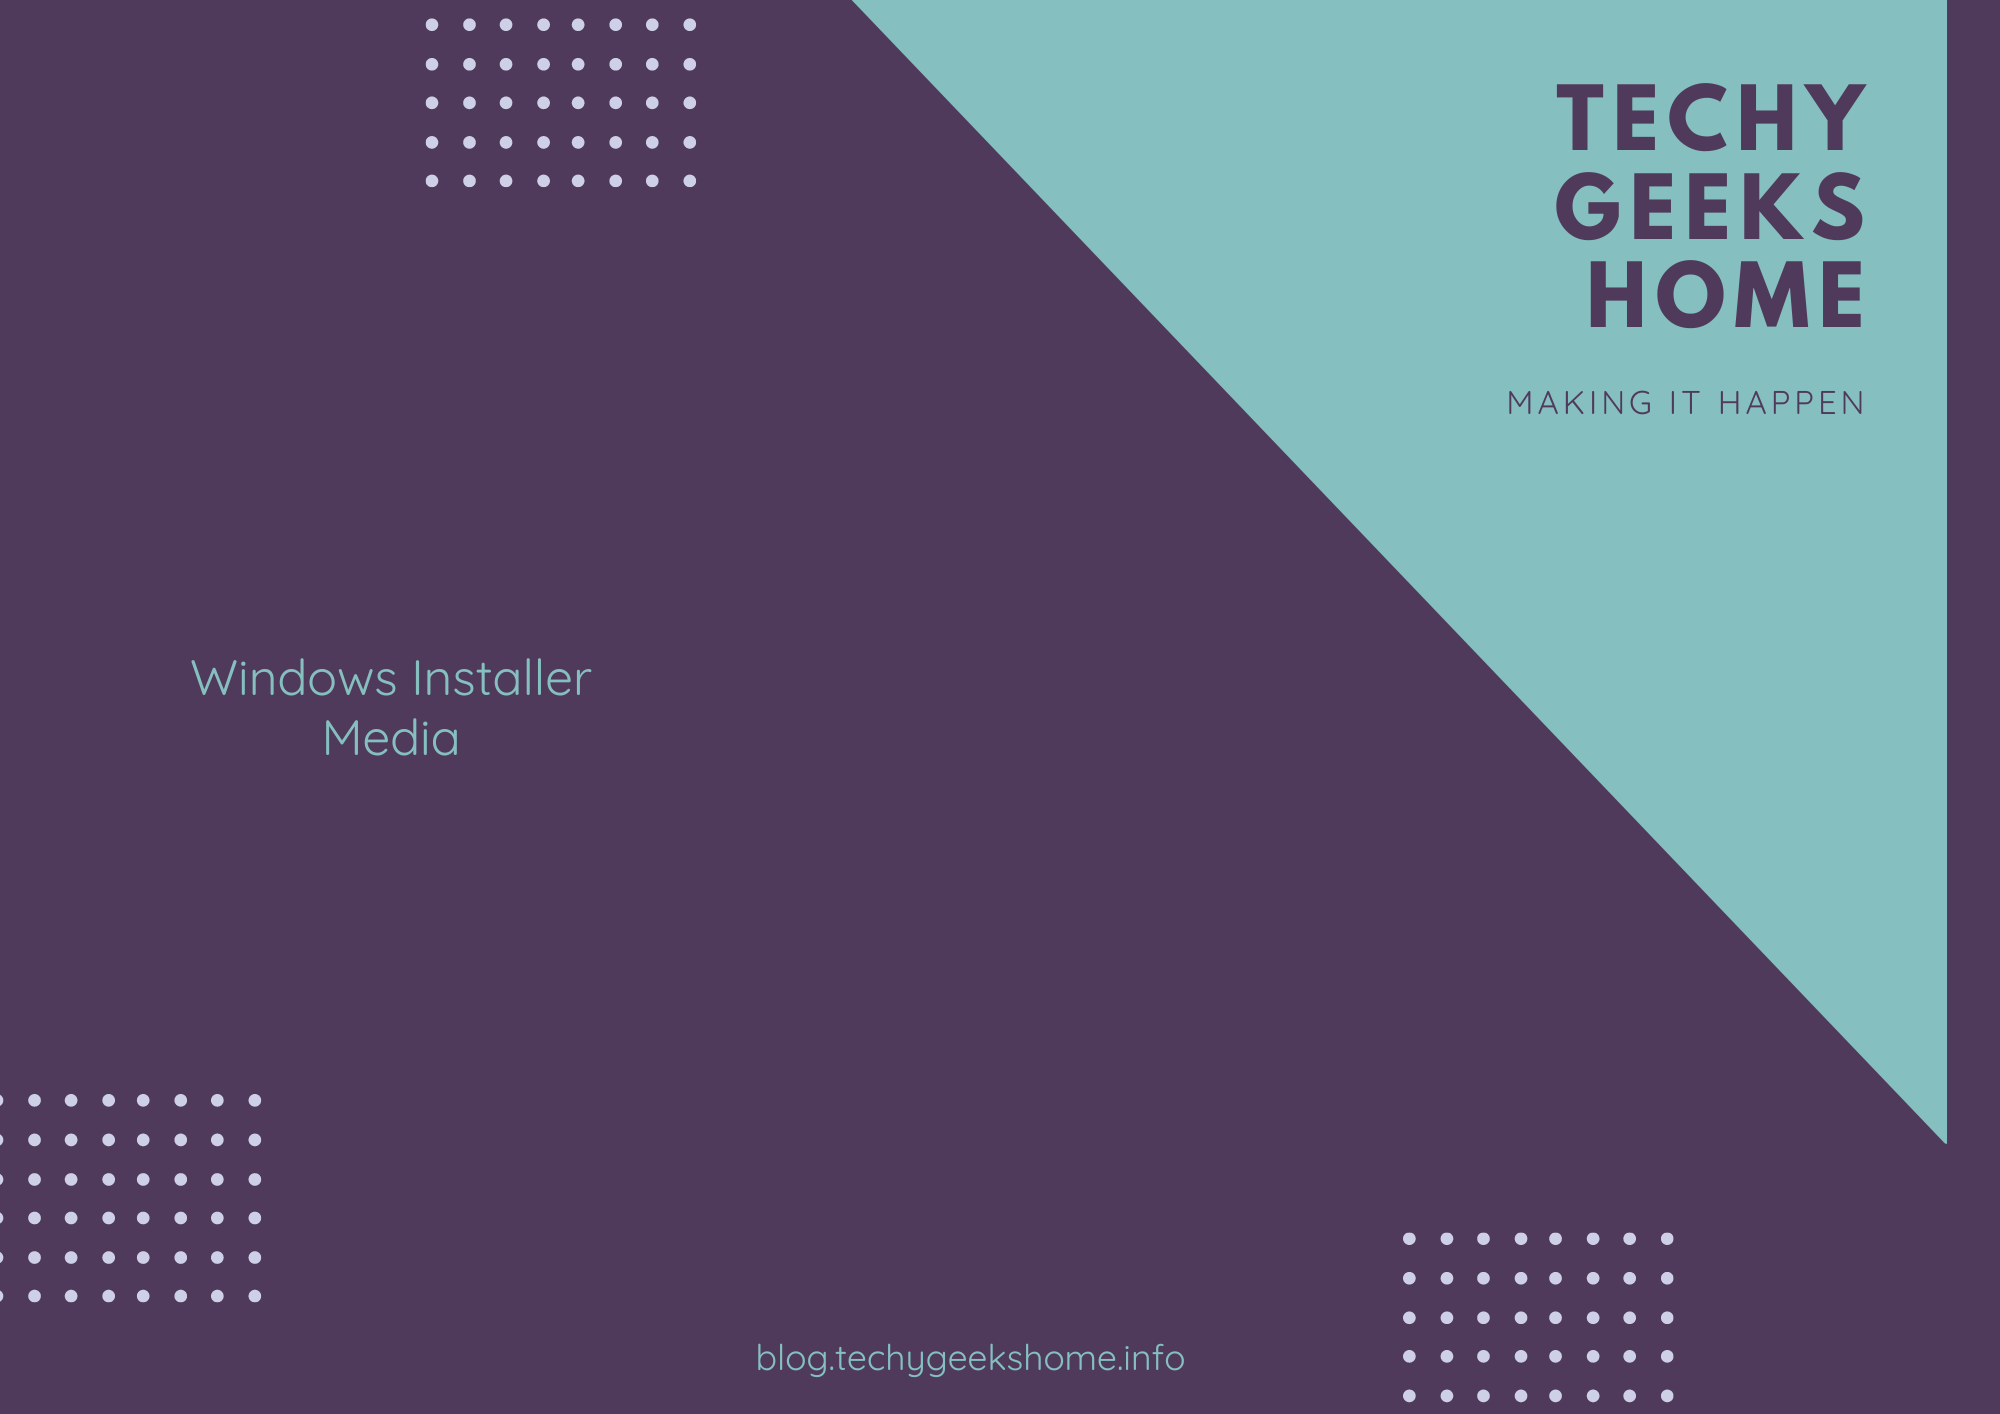 Graphic design with a dark purple and teal split background. It features the text "Windows Installer Media" on the left and "Techy Geeks Home: Making It Happen" on the right,